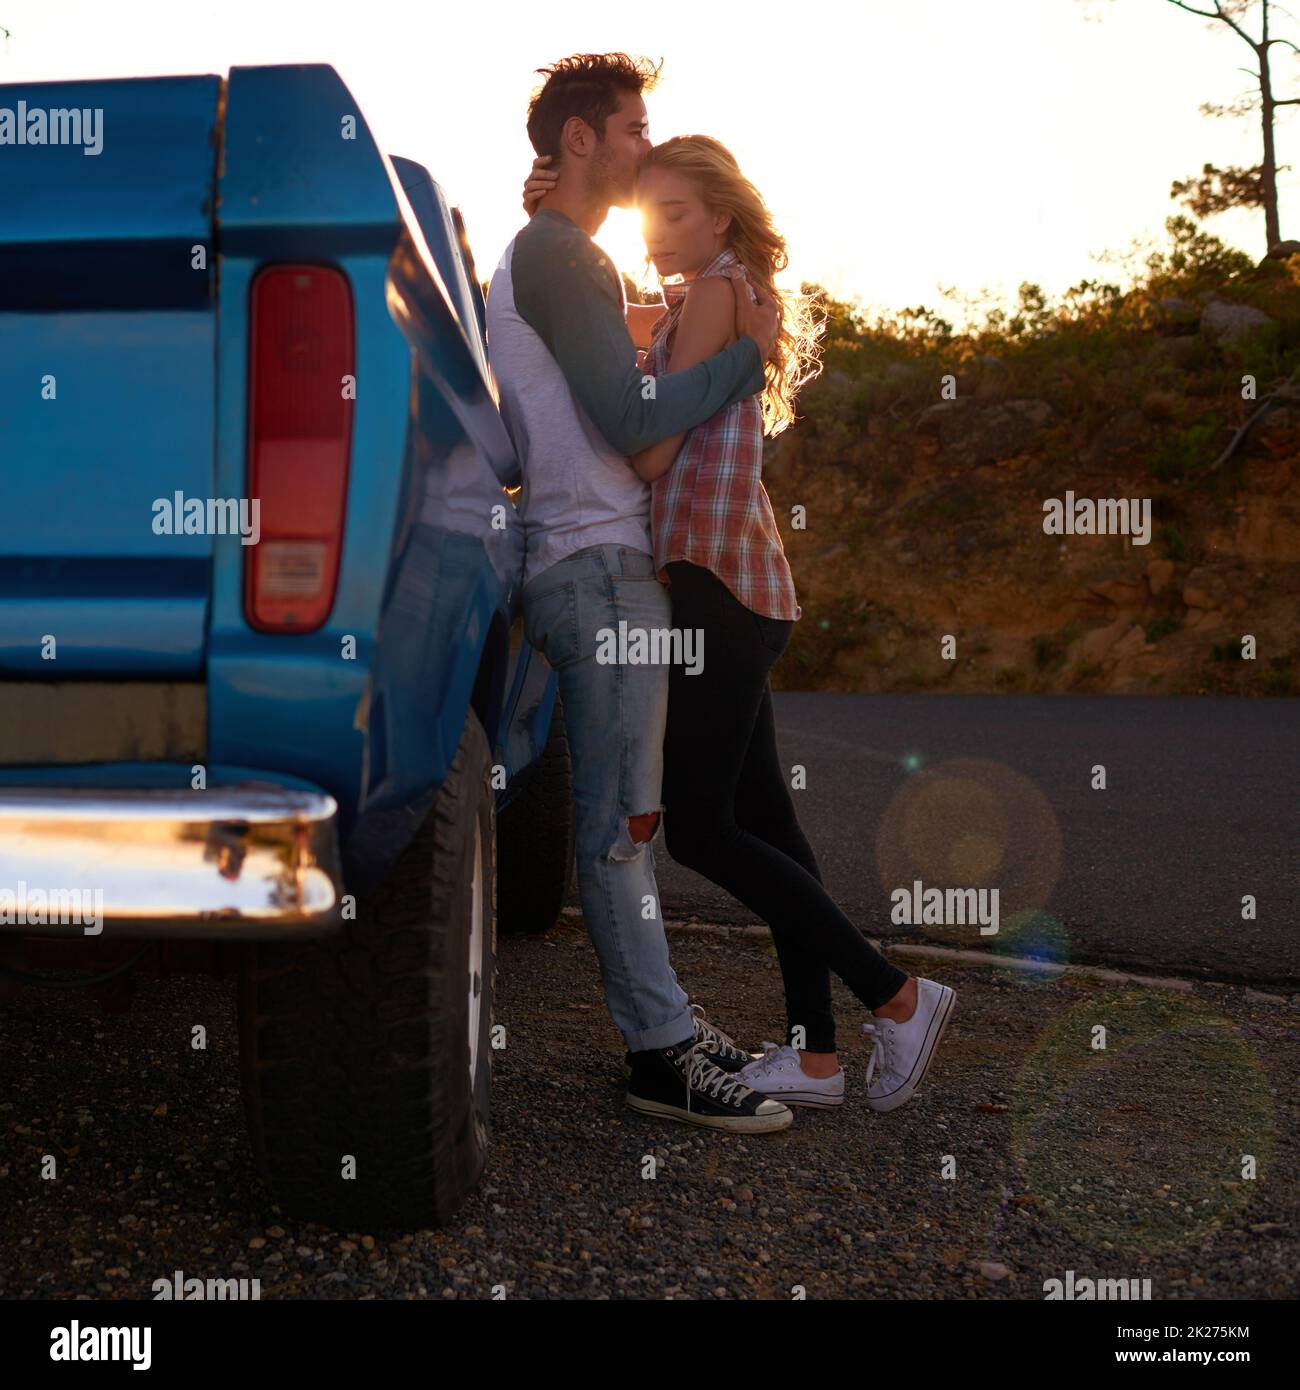 Off road romance. Shot of an affectionate young couple on a roadtrip. Stock Photo